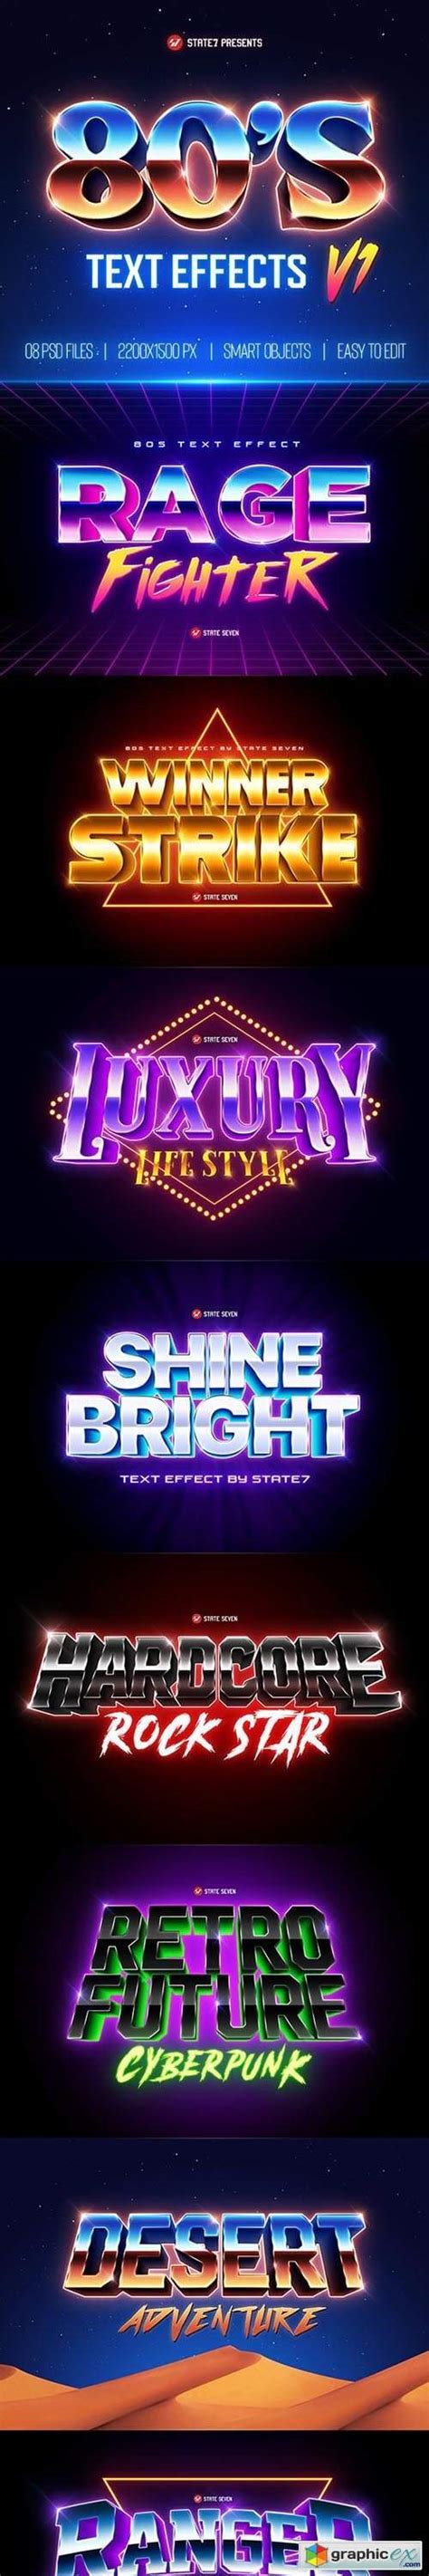 80s Text Effects V1 Free Download Vector Stock Image Photoshop Icon